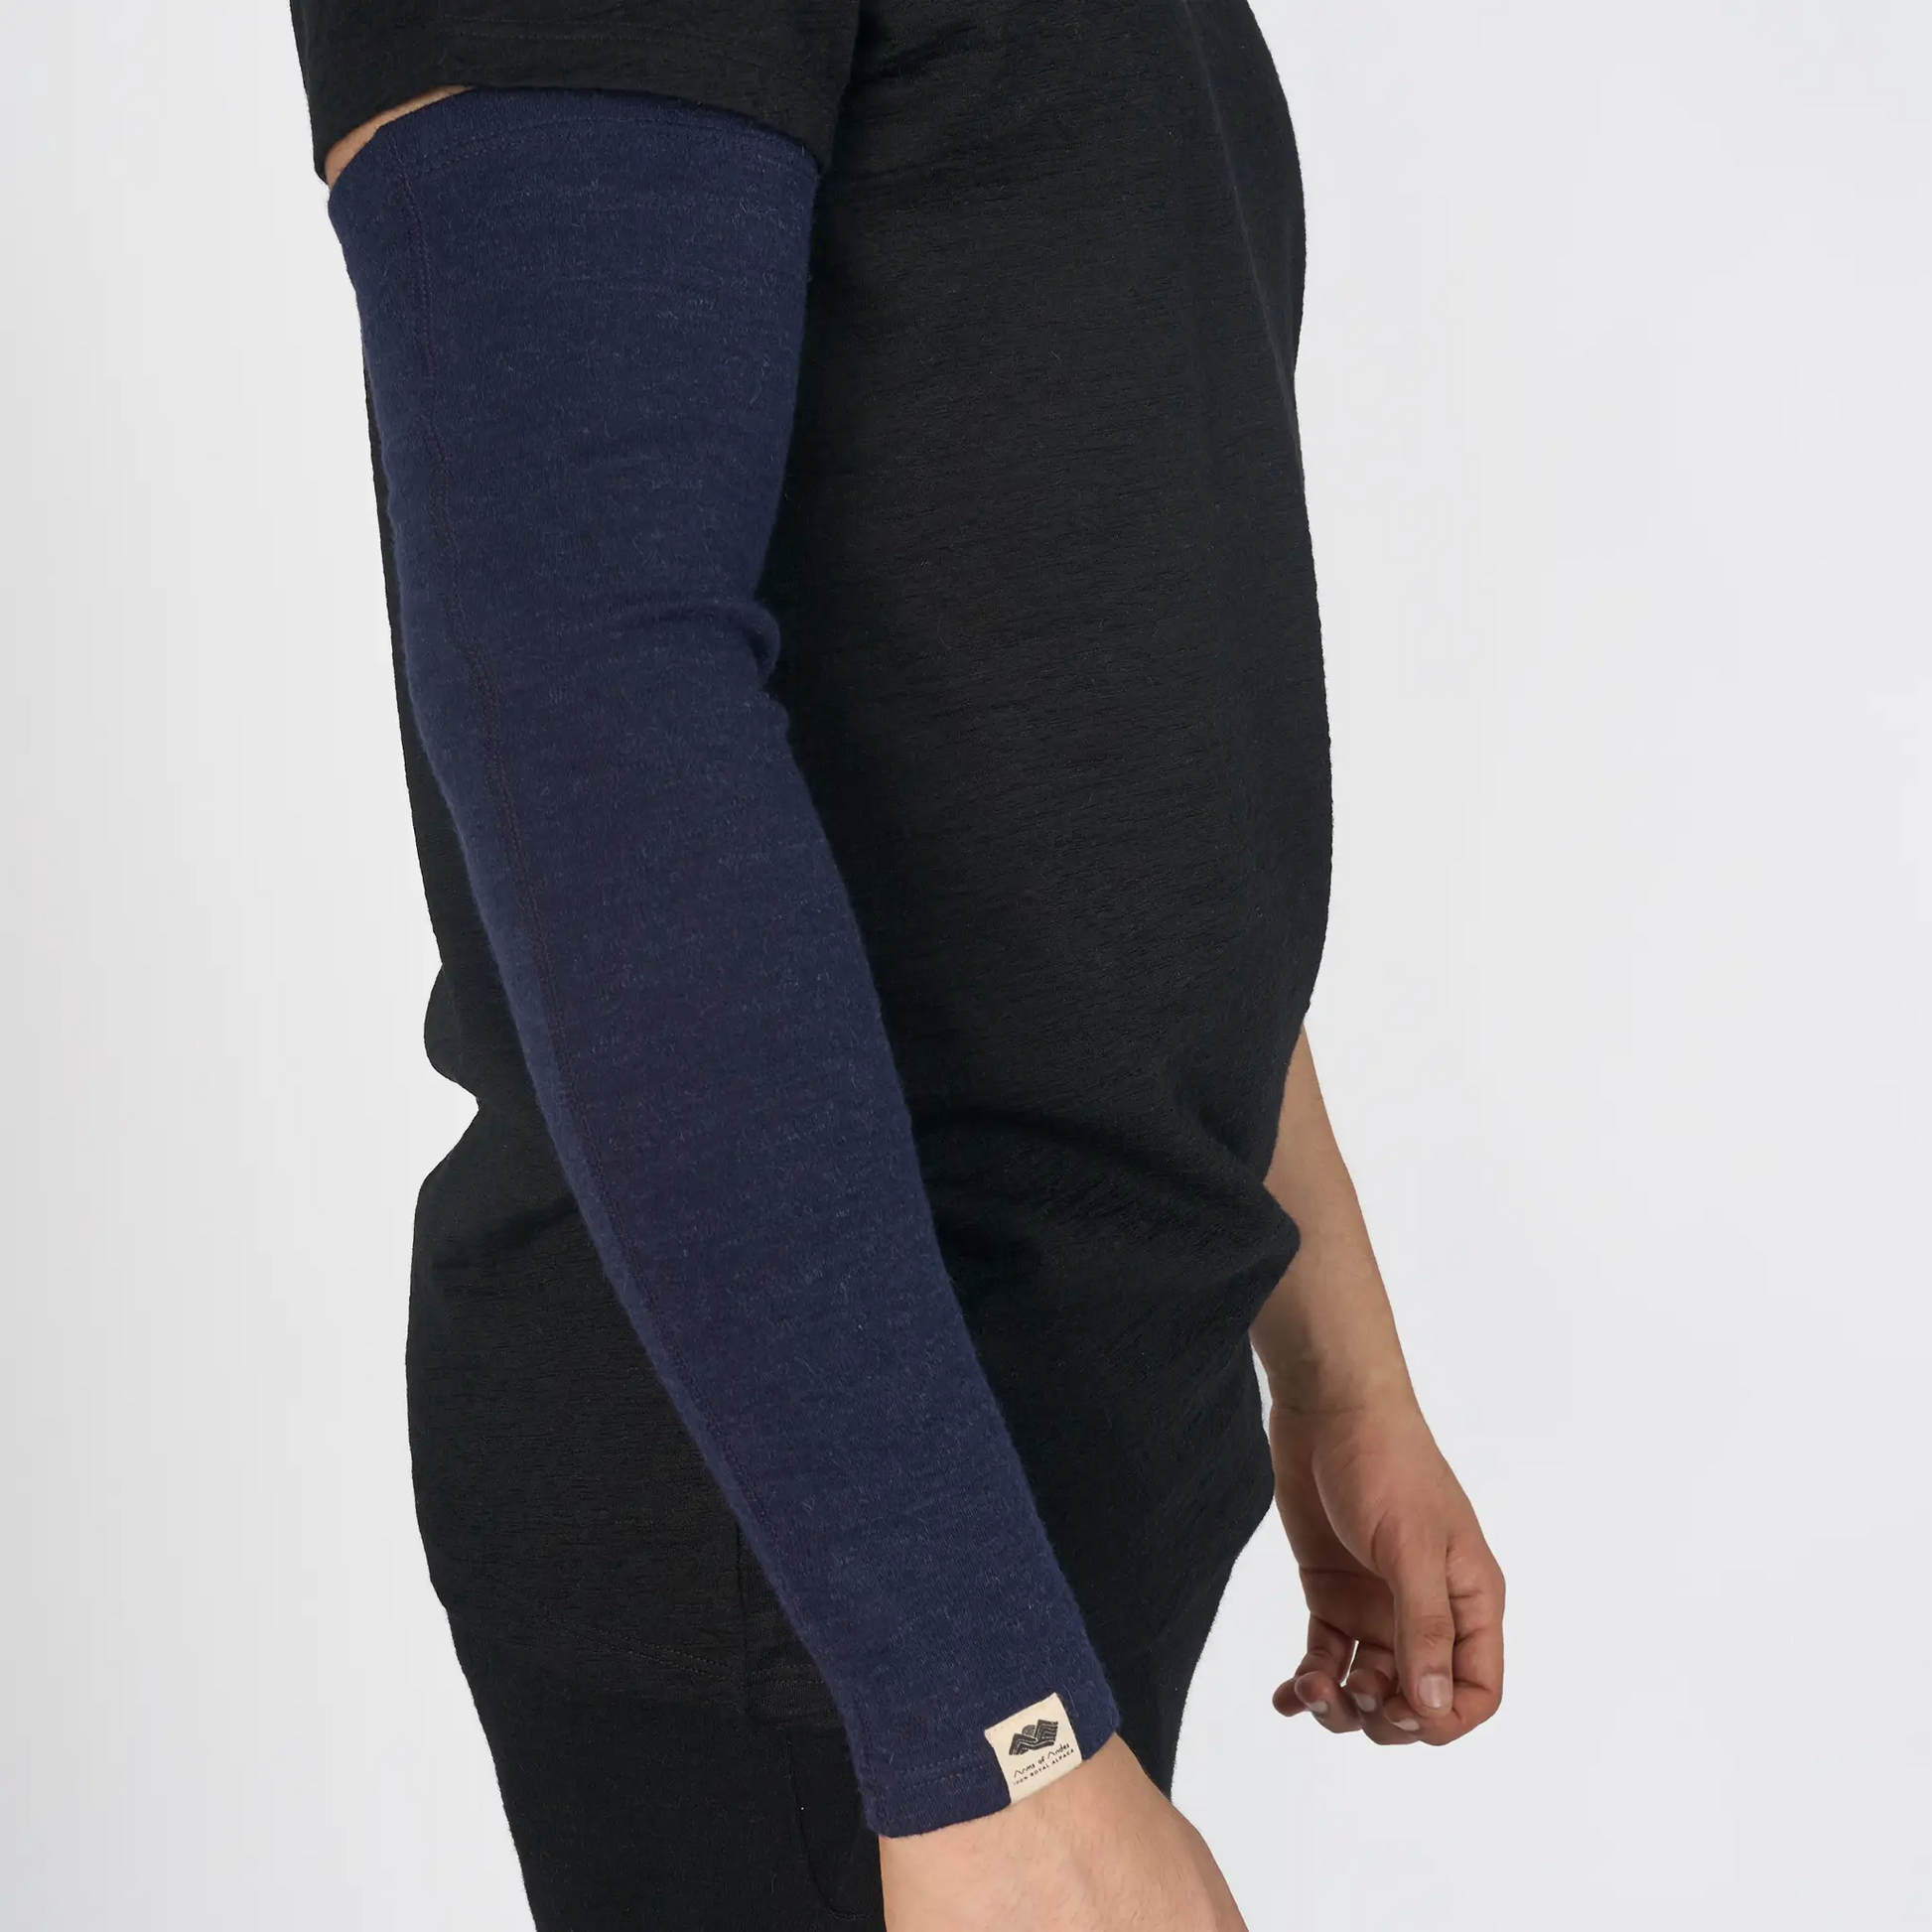 mens ecological sleeve midweight color navy blue